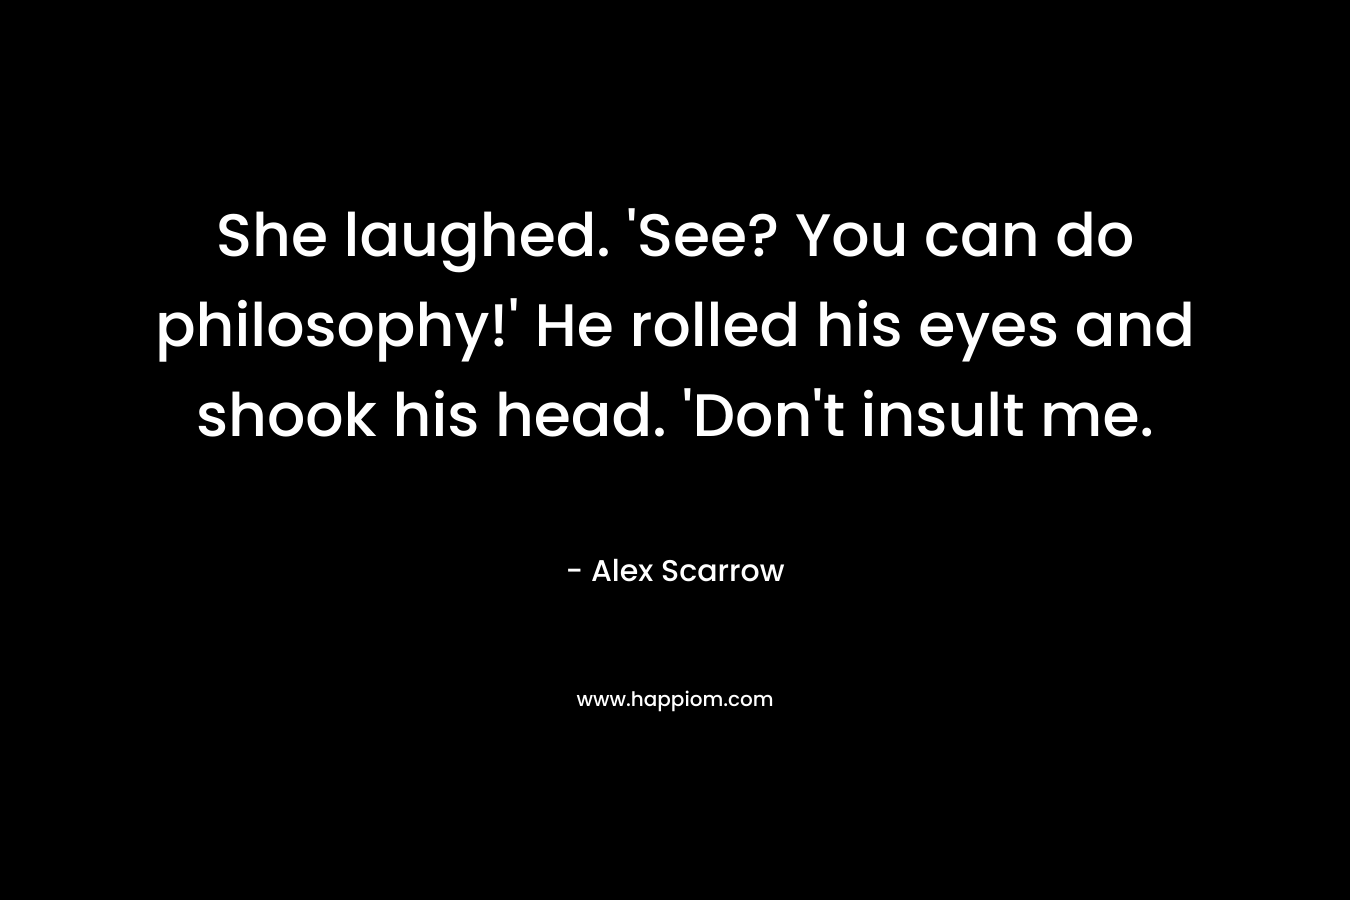 She laughed. 'See? You can do philosophy!' He rolled his eyes and shook his head. 'Don't insult me.